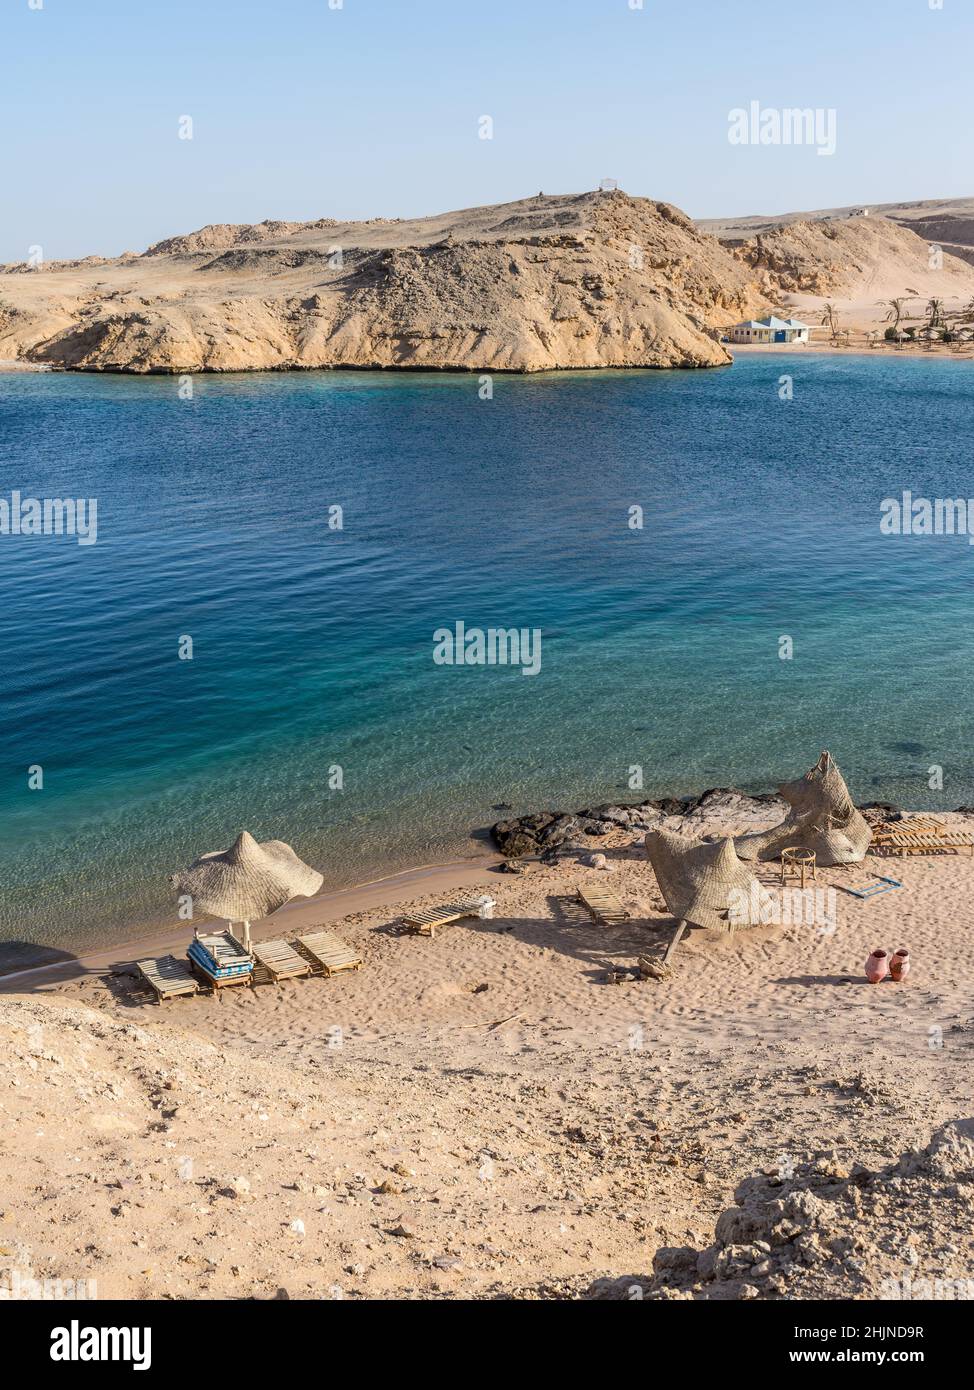 Hurghada, Egypt - June 03, 2021: Abandoned hotel the Al Nabila Grand Bay Makadi and empty beach with no people during a pandemic at the Secret bay, Hu Stock Photo